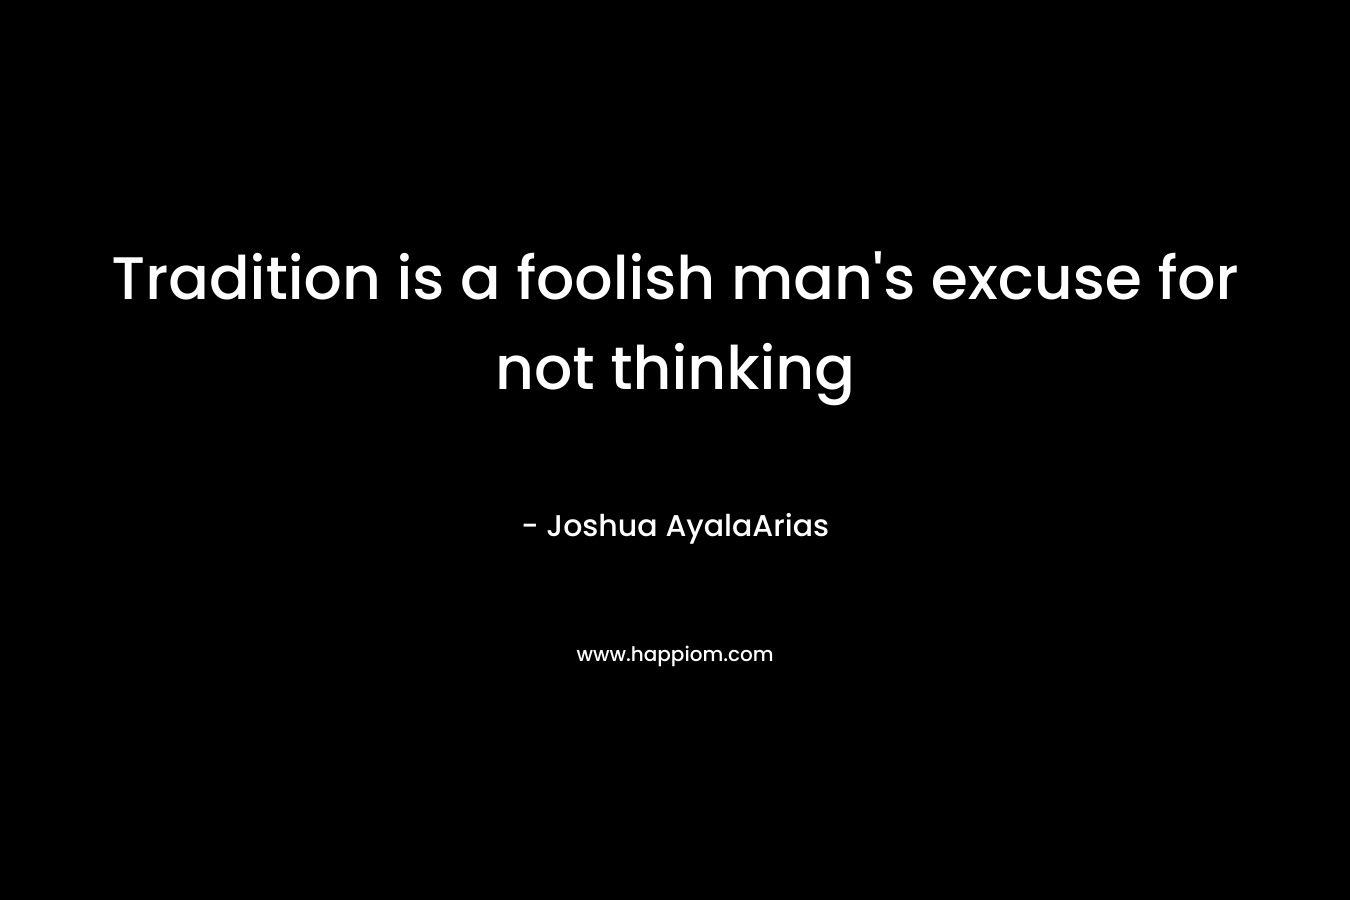 Tradition is a foolish man's excuse for not thinking